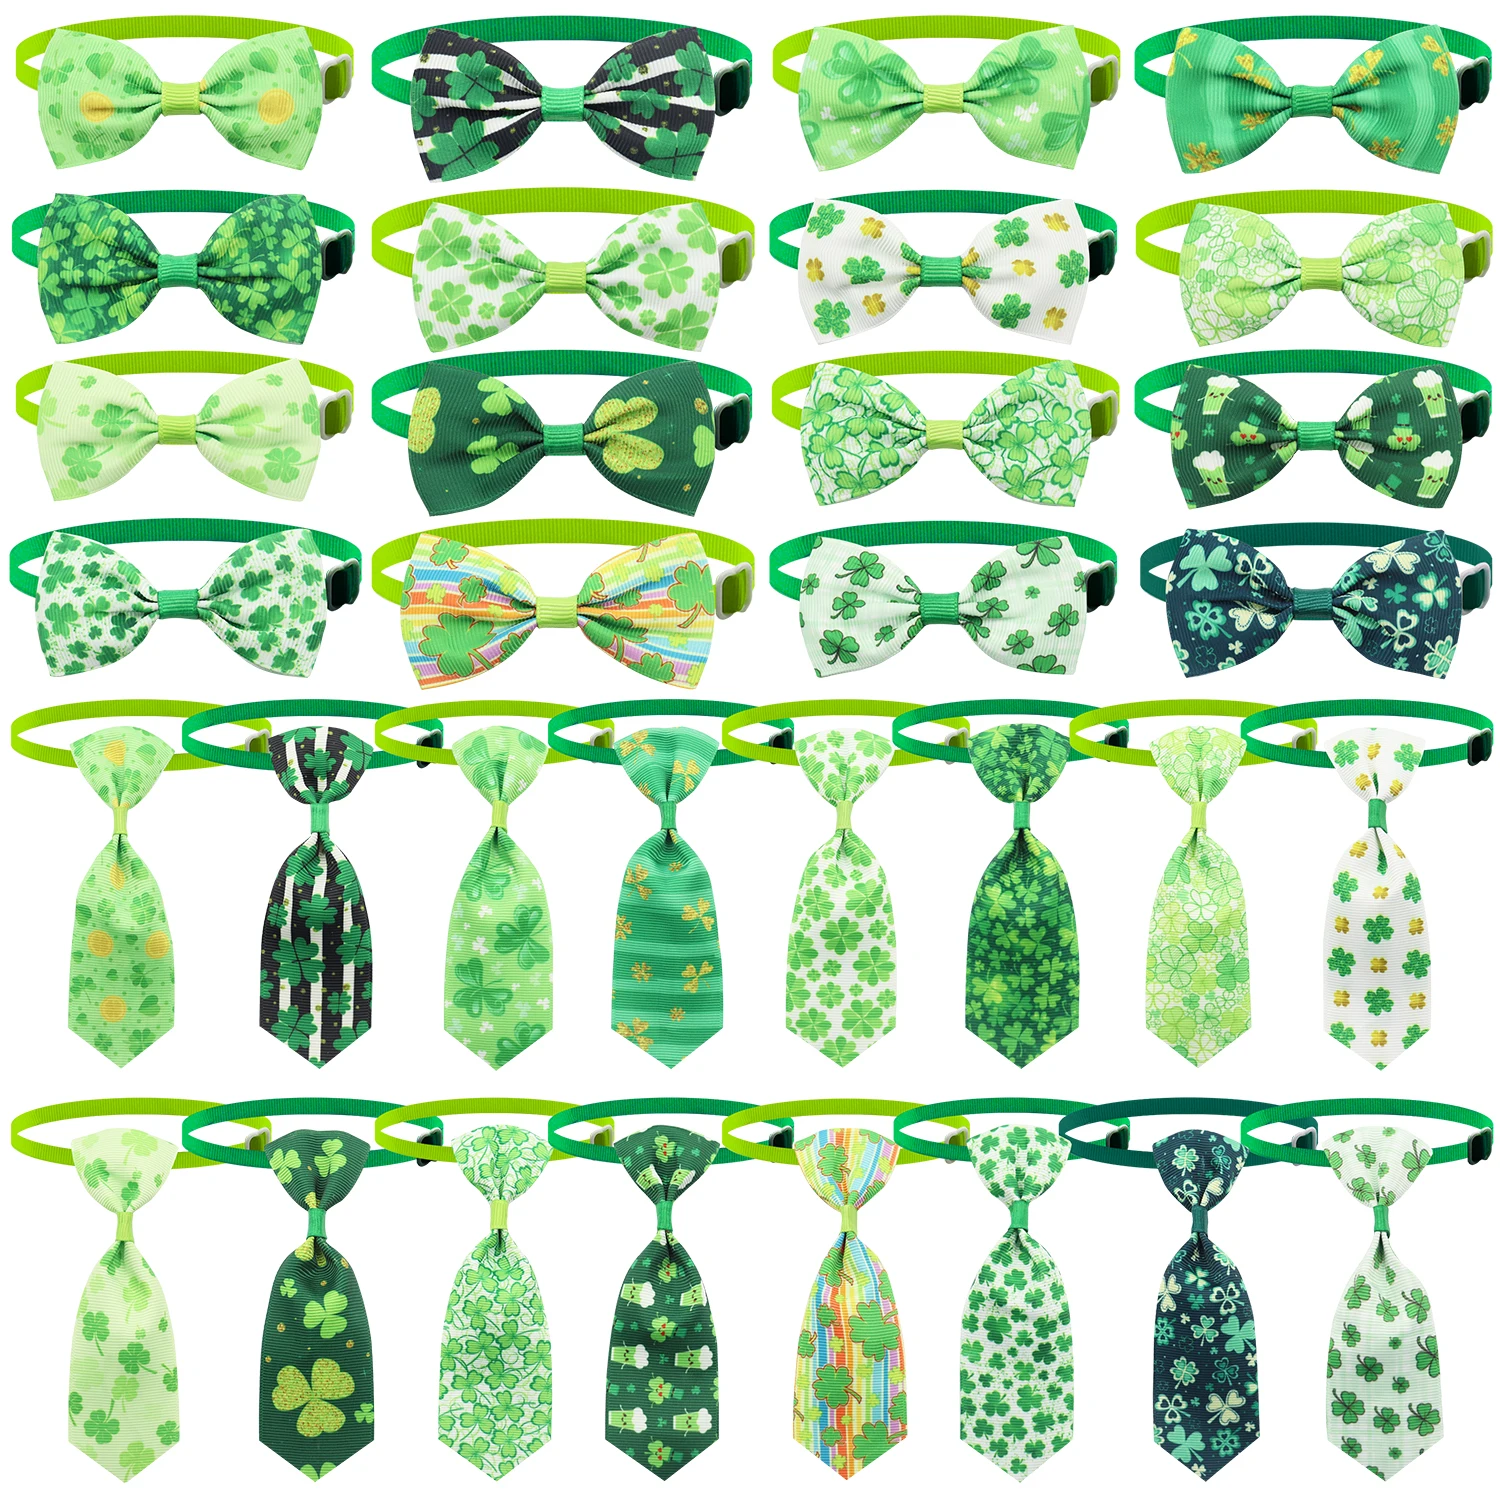 

50/100Pcs St. Patrick's Day Dog Bows Irish Festival Cat Pet Grooming Bows Neckties Puppy Dog Accessories Bowties Clover Bows Dog